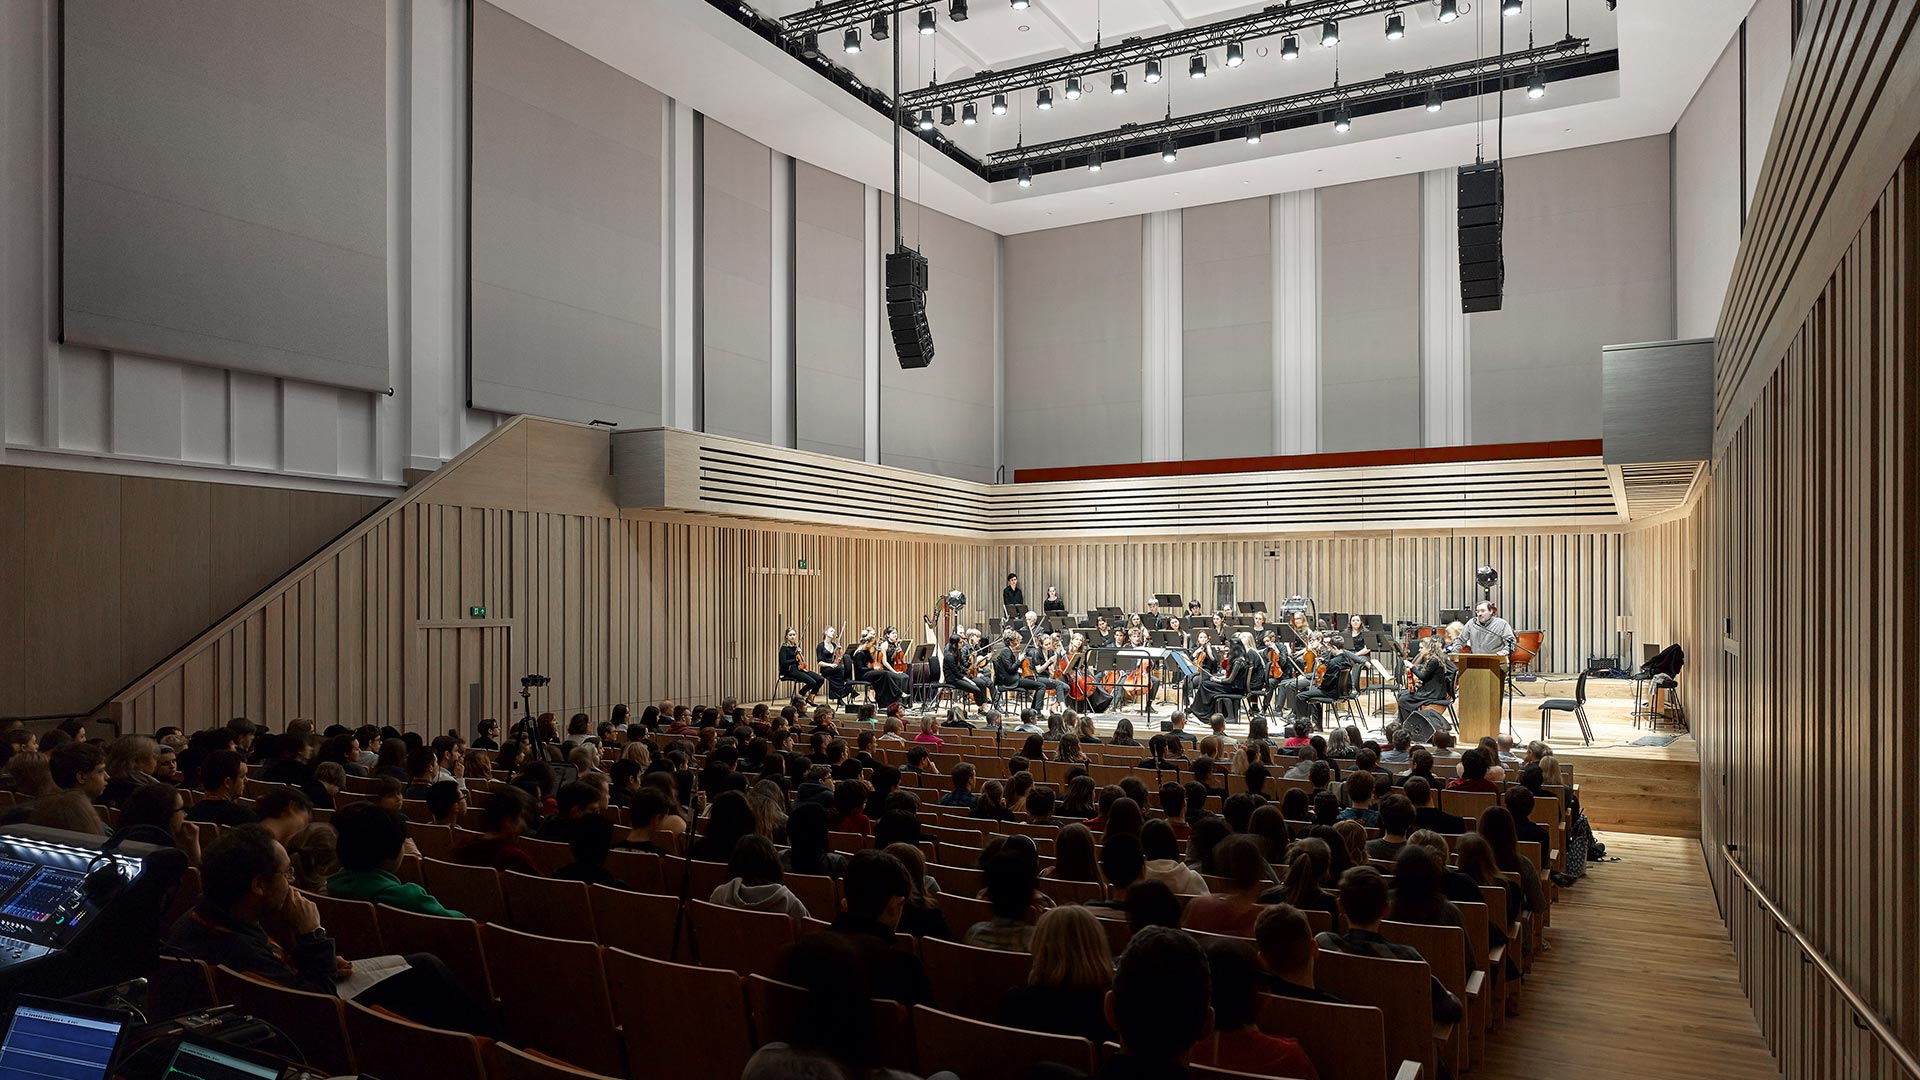 Chetham's School of Music, The Stoller Hall